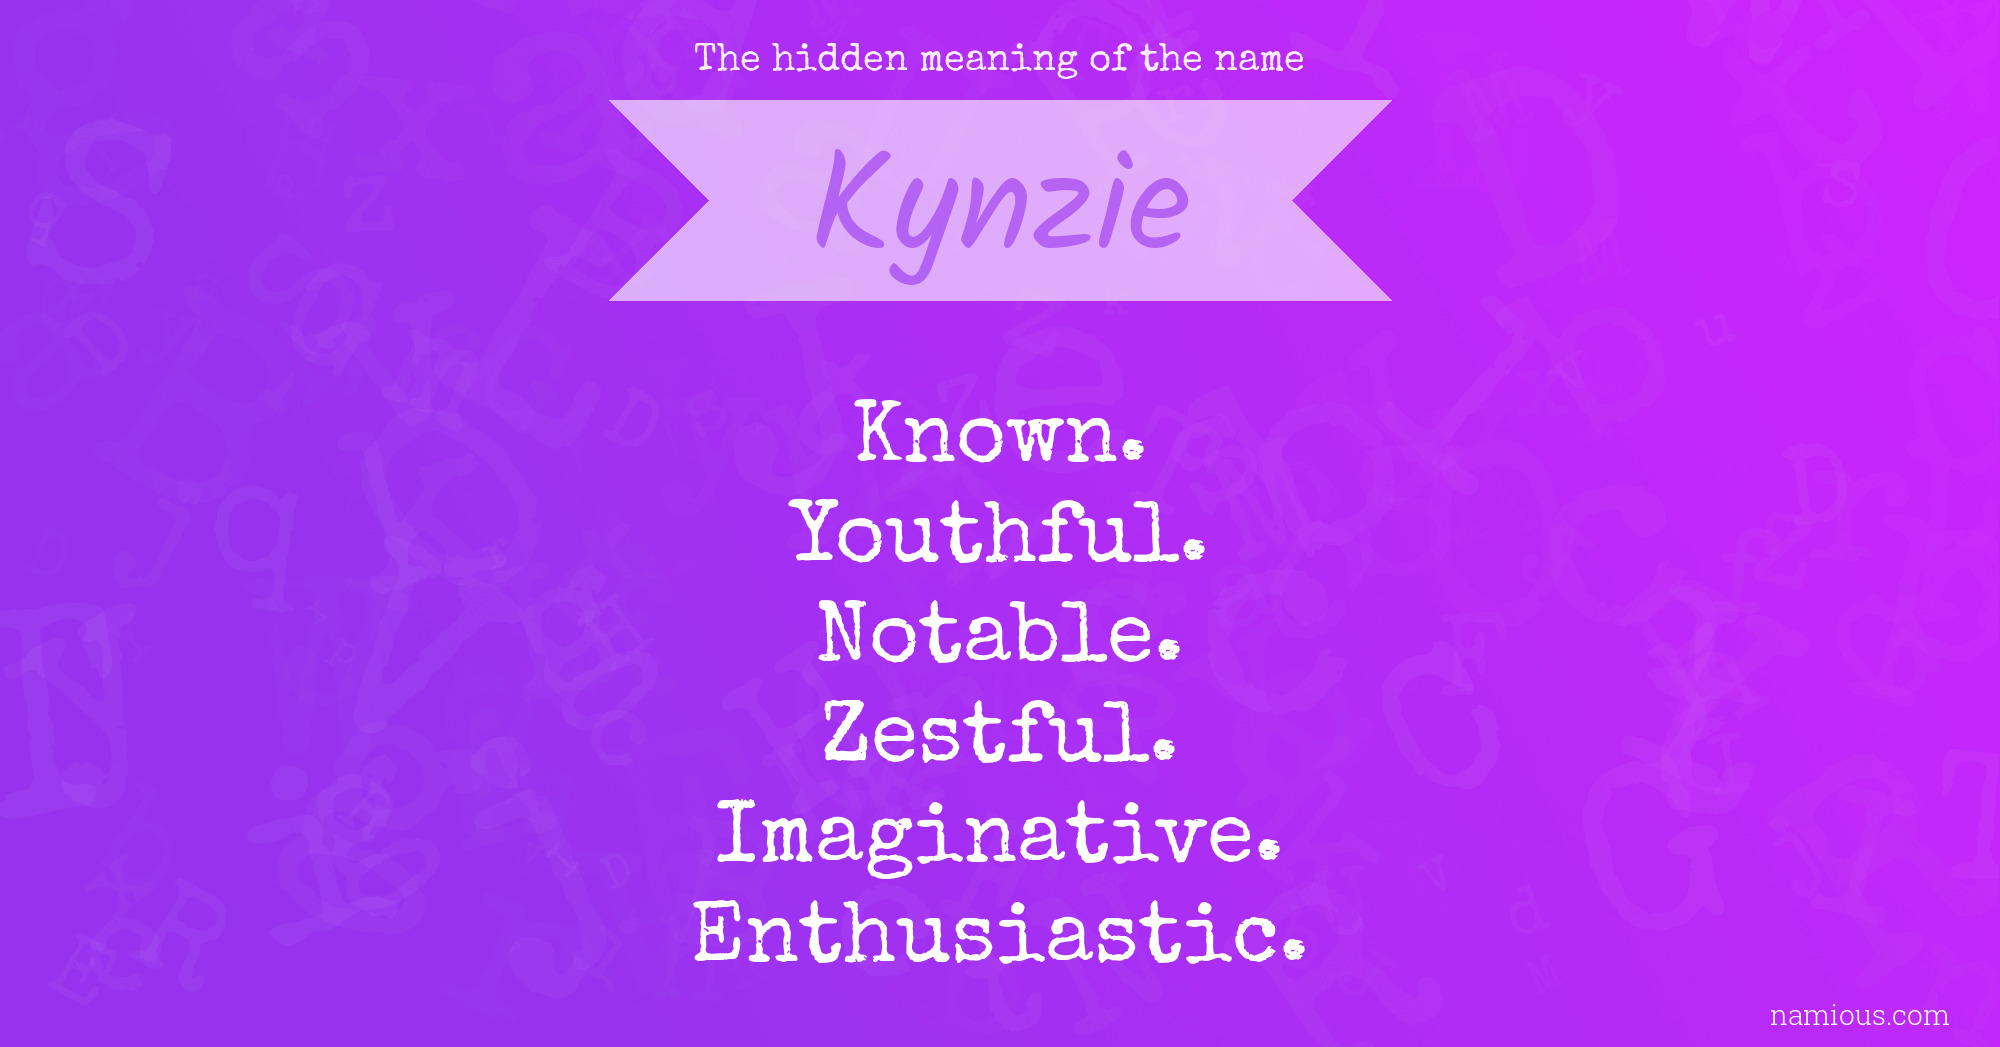 The hidden meaning of the name Kynzie